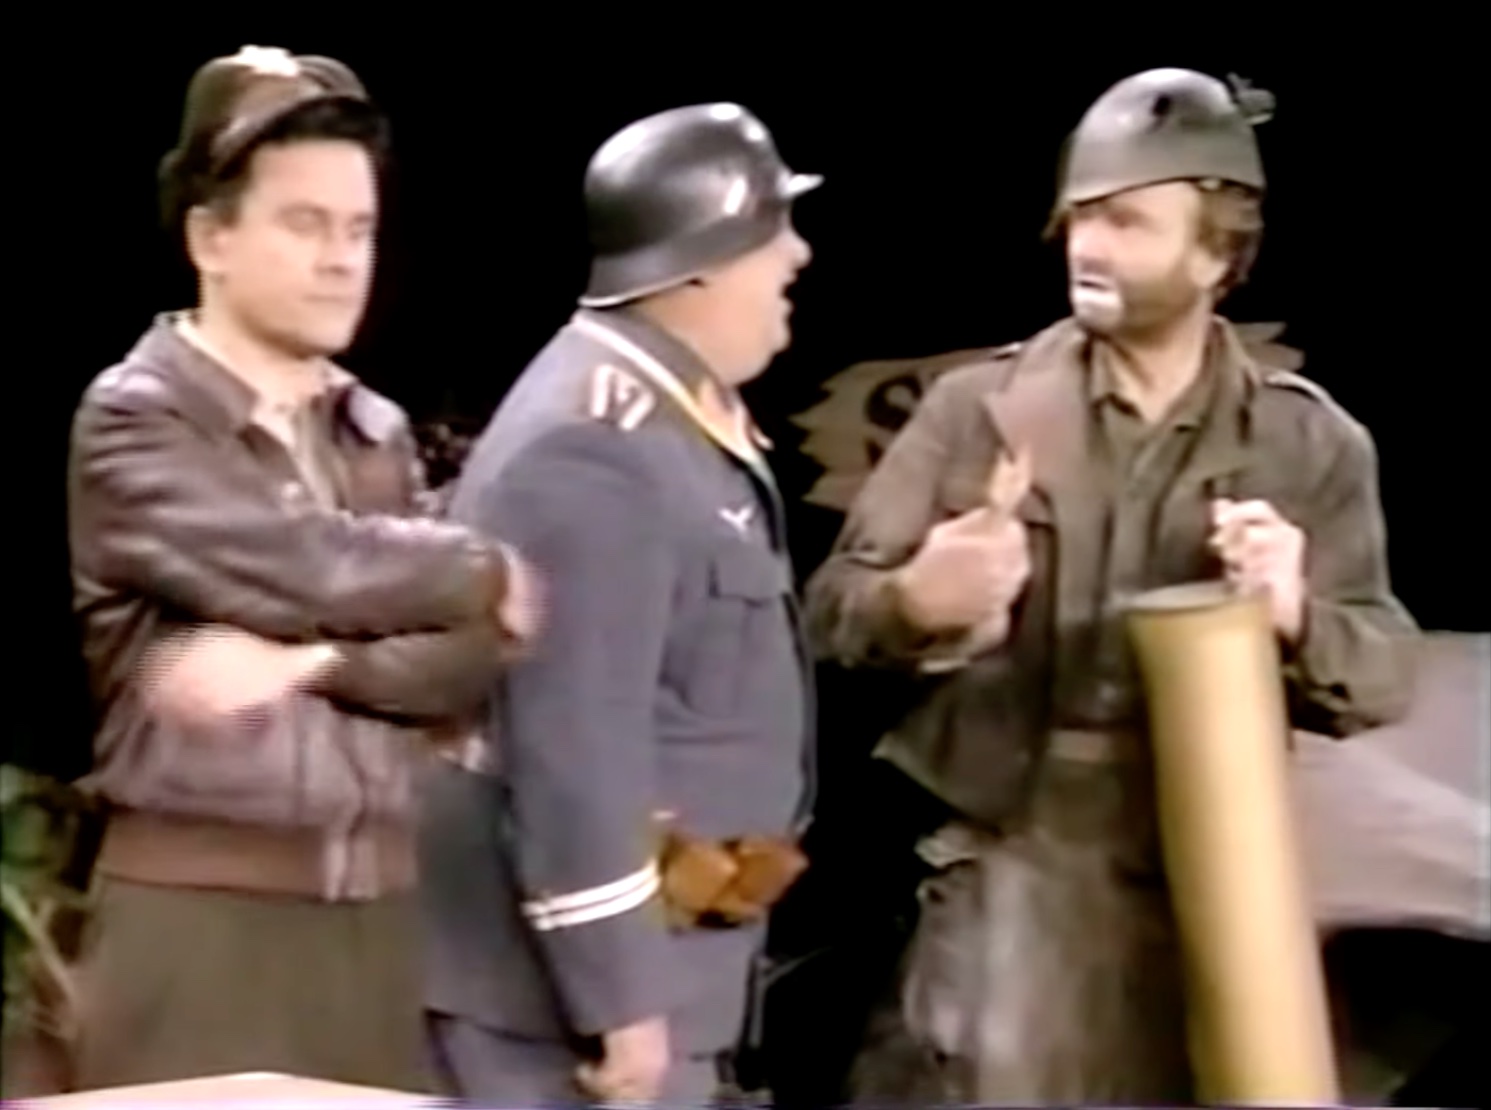 Colonel Hogan, Sergeant Schultz, and Freddie the Freeloader depending on Freddie's survival skills in "How You Gonna Keep 'Em Down in the Dump?"